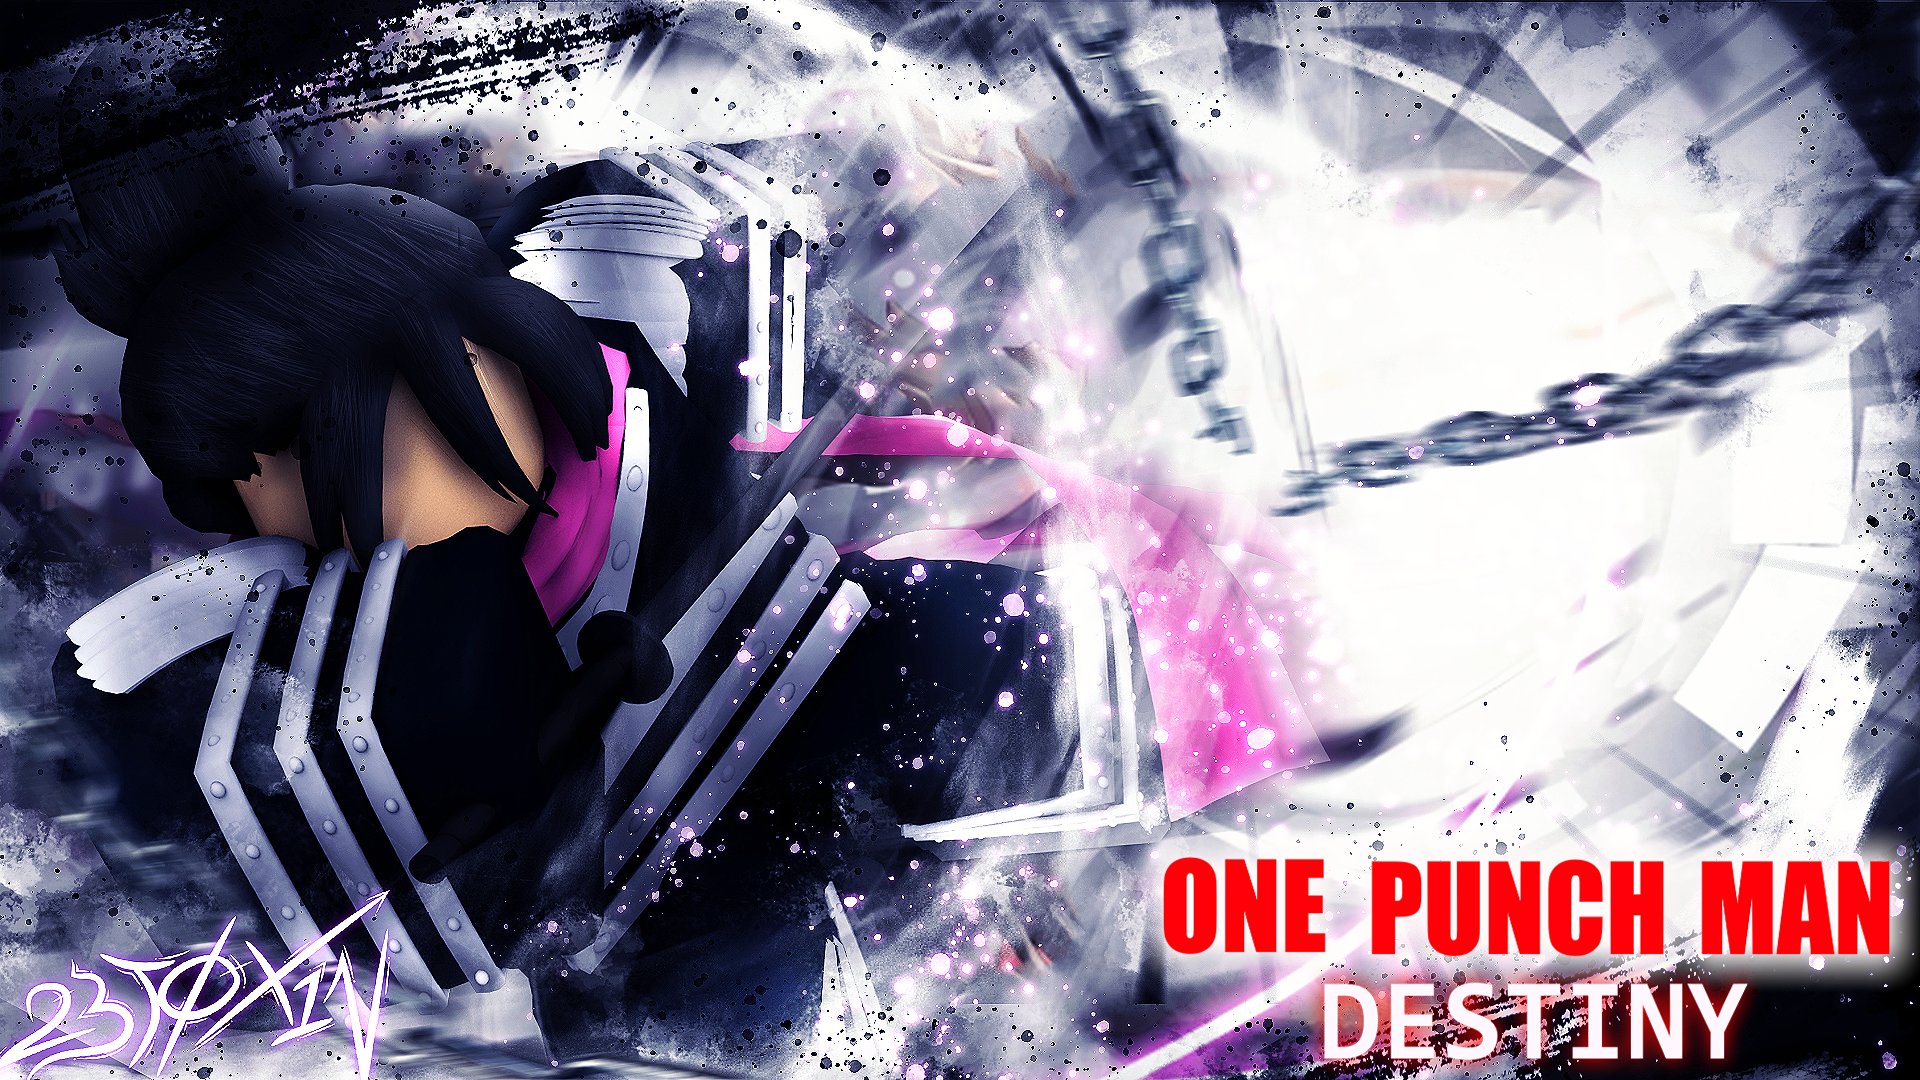 23t0x1n On Twitter Gfx For One Punch Man Destiny Play The Game Here Https T Co Ekzh0laotv Roblox Robloxart Robloxgfx Robloxdev - roblox one punch man gfx